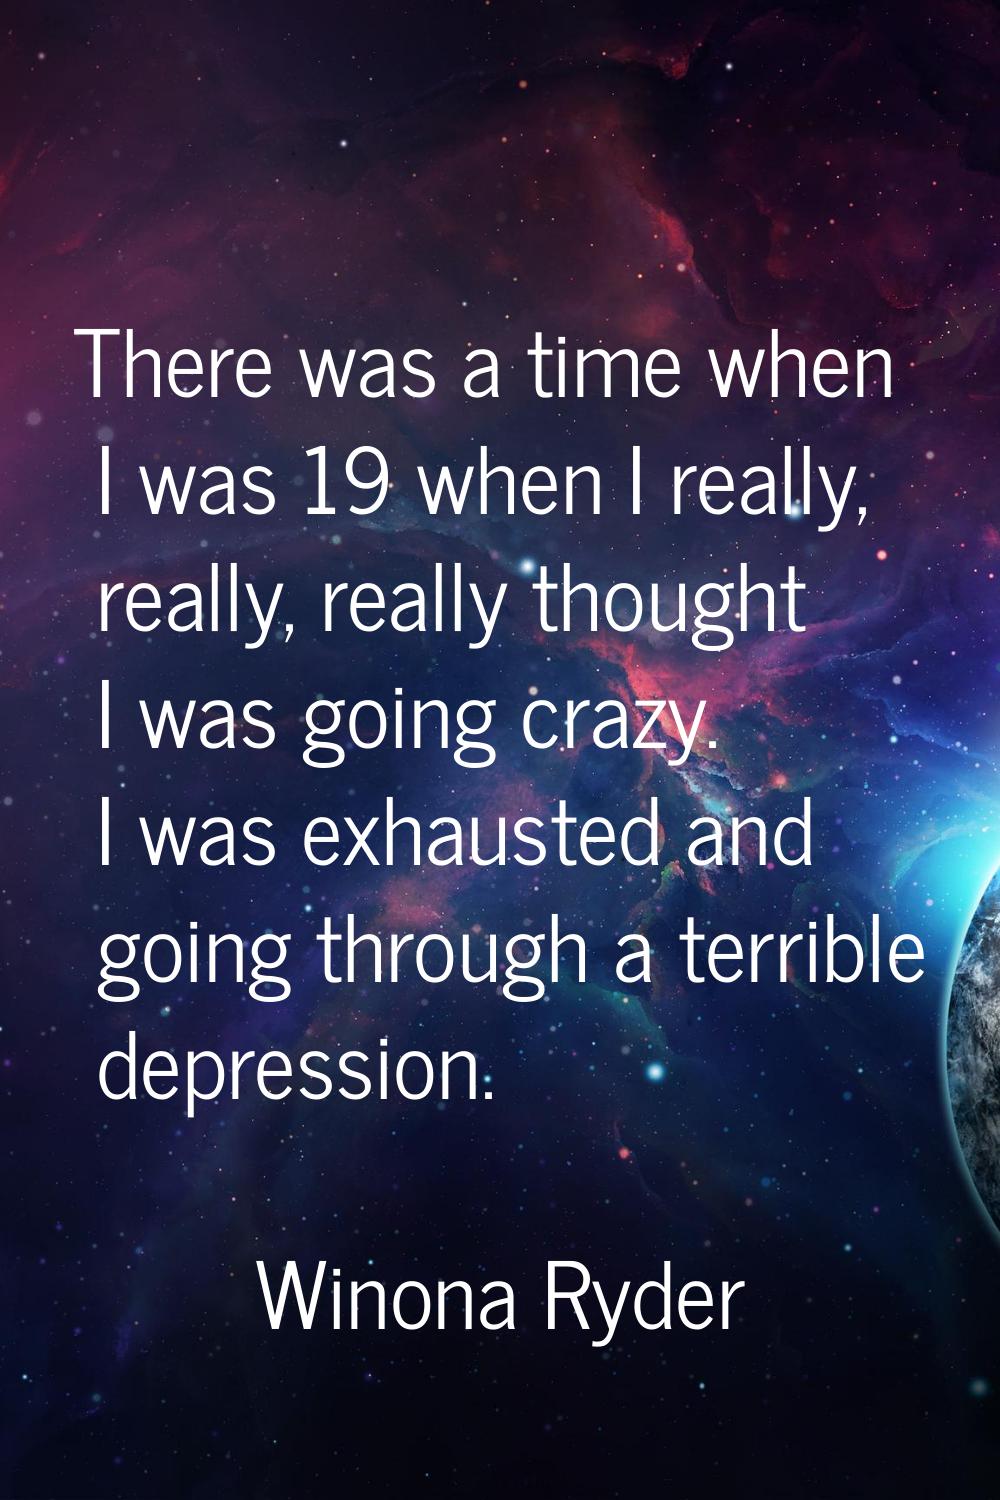 There was a time when I was 19 when I really, really, really thought I was going crazy. I was exhau